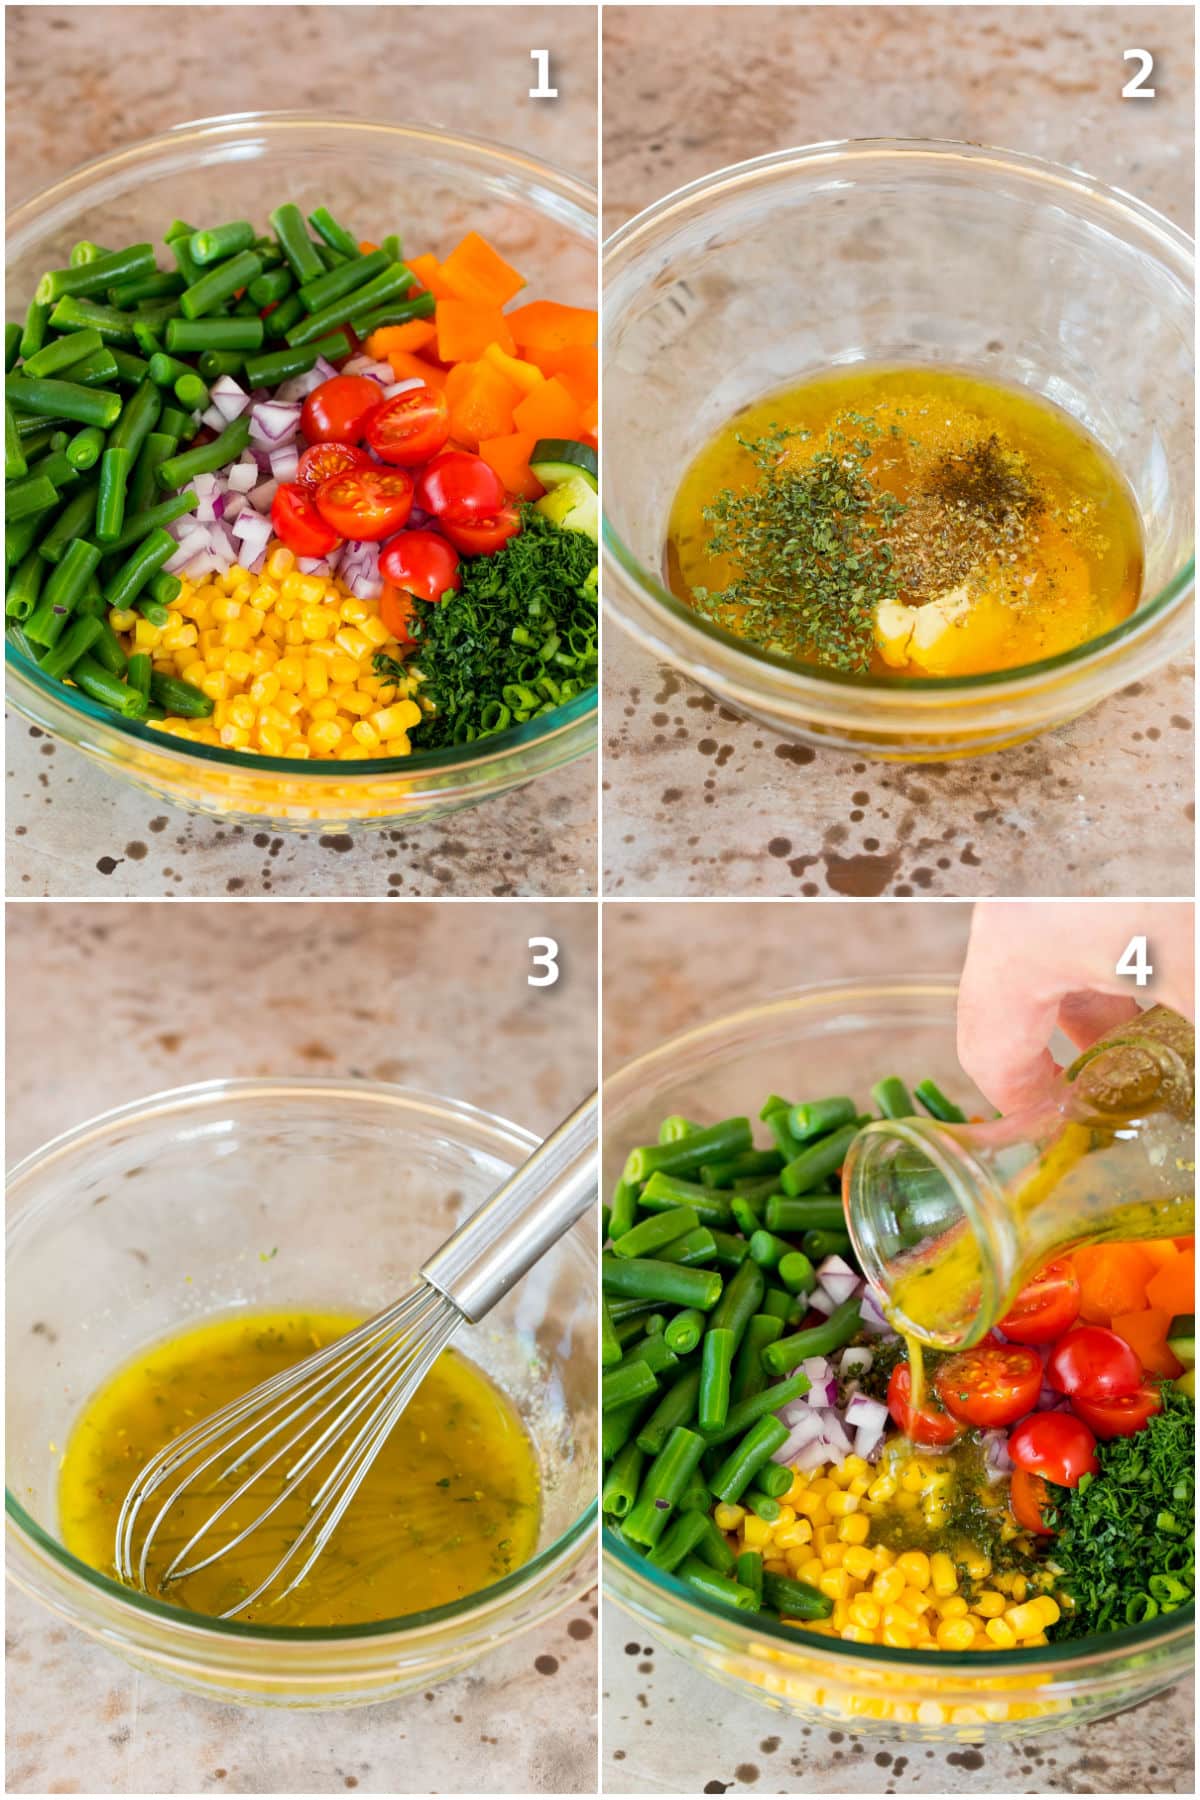 Step by step shots showing how to make salad dressing and assemble salad.